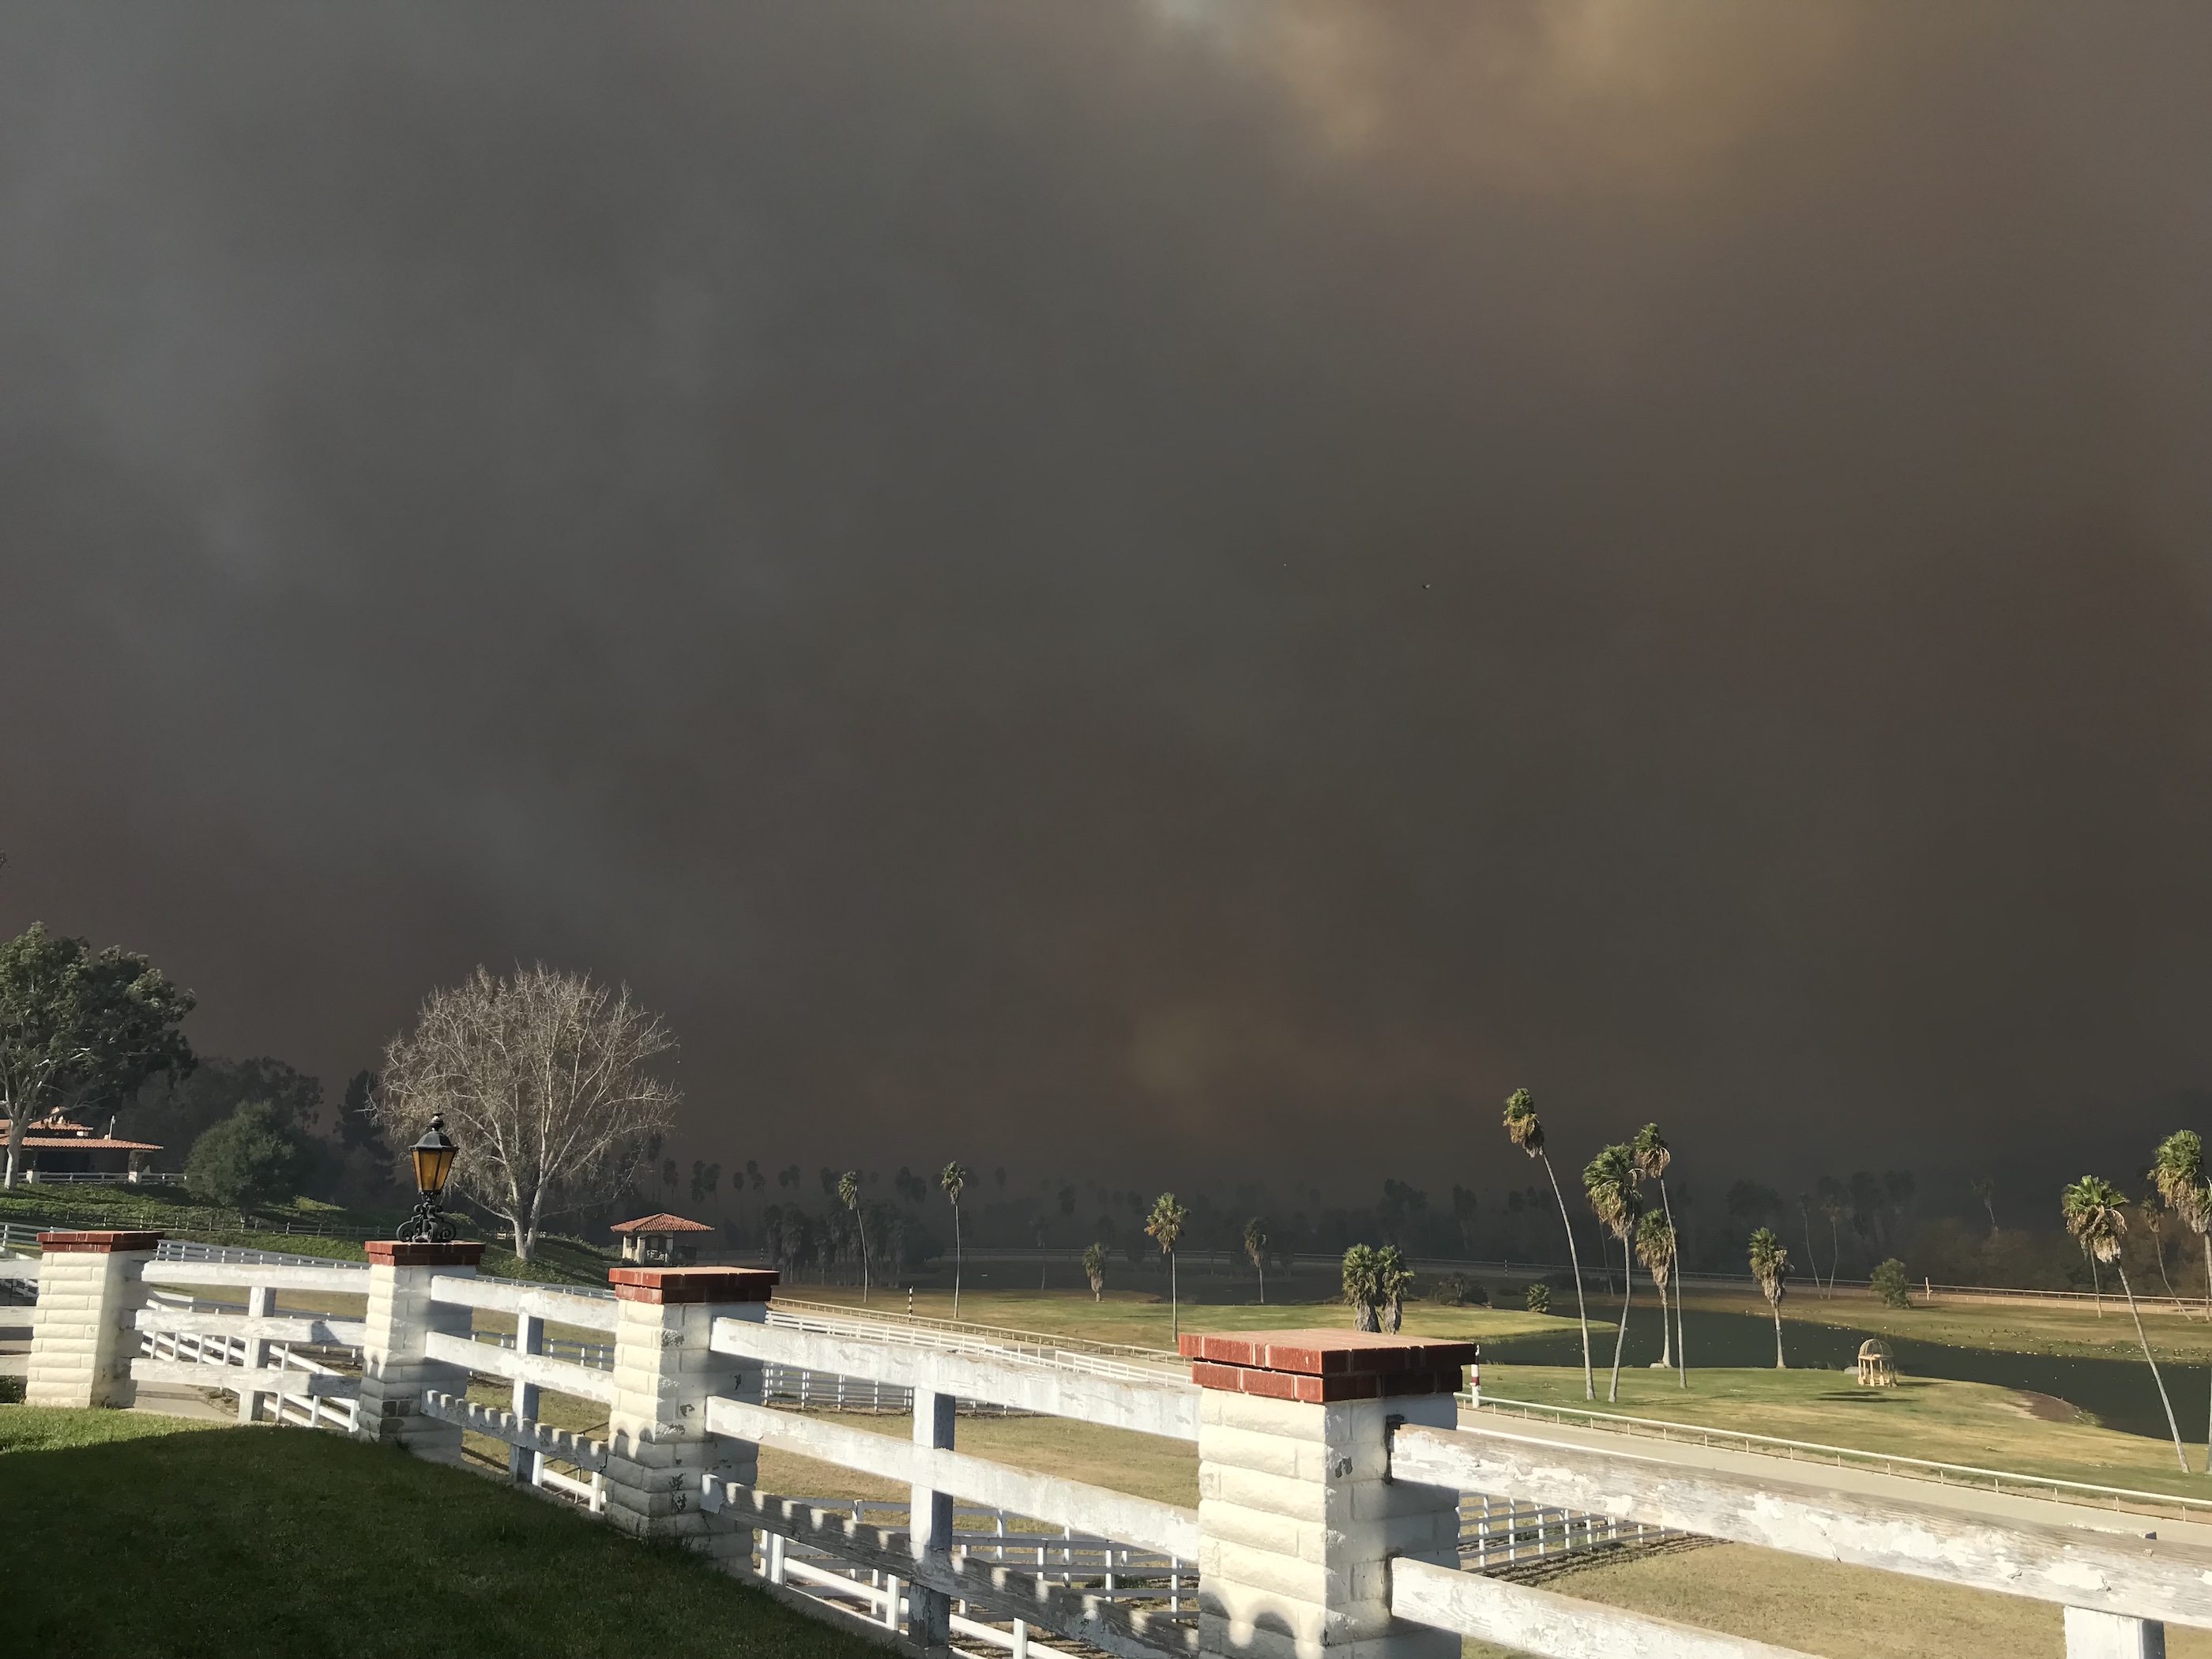 Doom-laden skies: the view from the Trifecta Equine Athletic Center, where about 70 horses were taken in from nearby San Luis Rey Downs